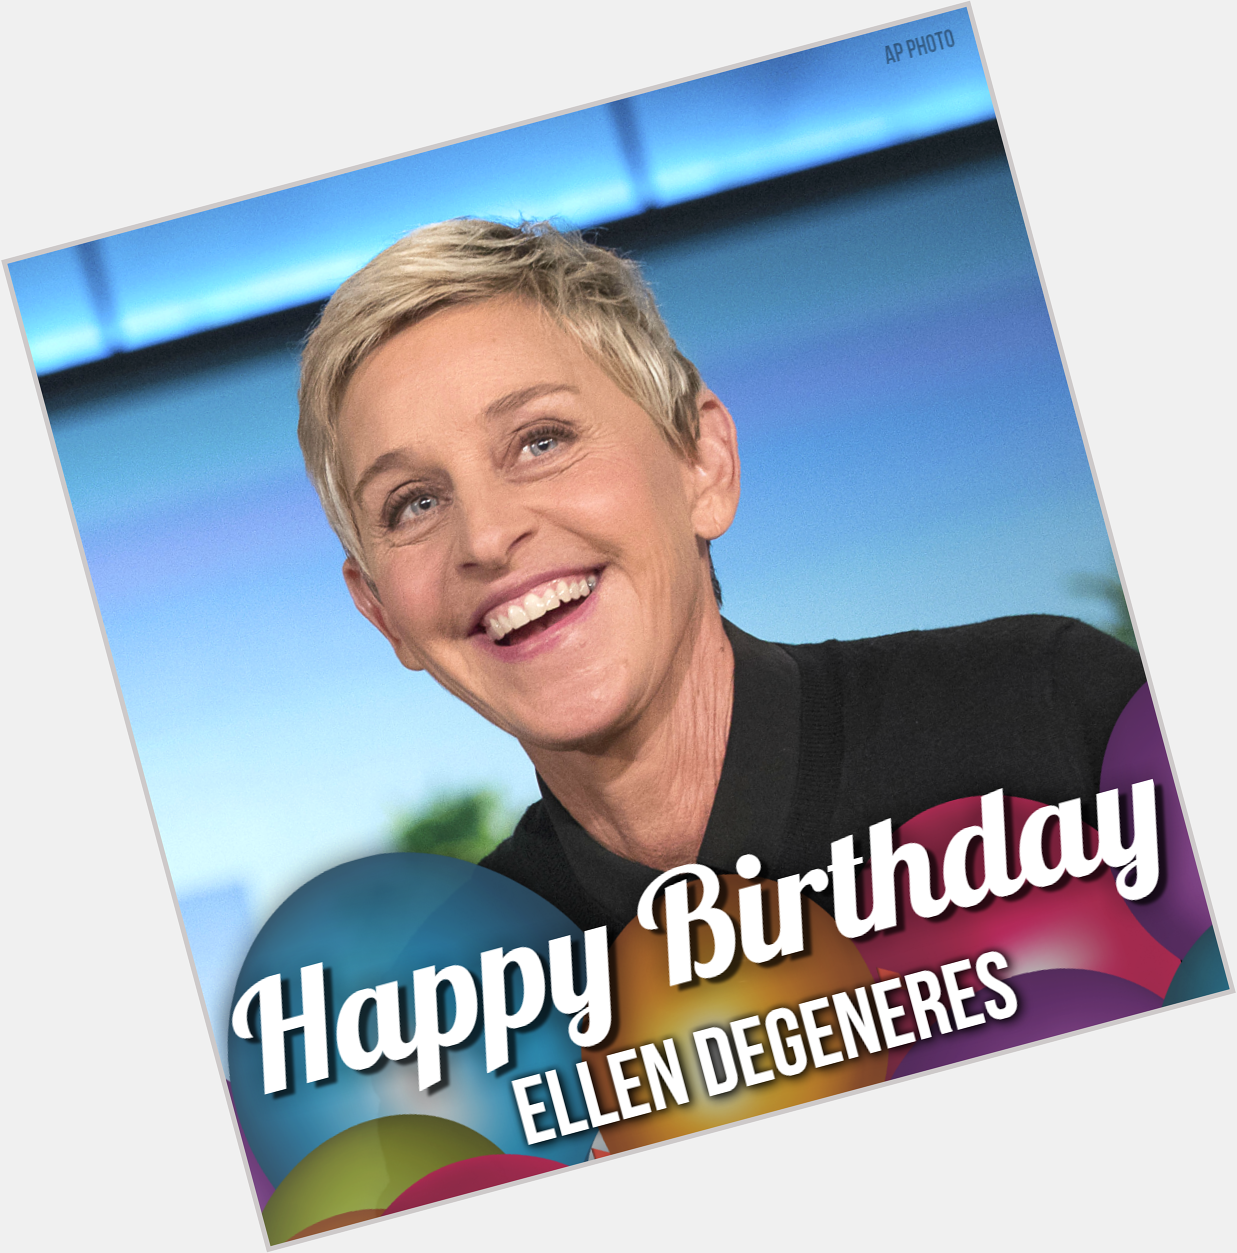 Happy Birthday, Ellen DeGeneres! 
The popular talk show host, comedian and star of Finding Dory turns 60 today. 